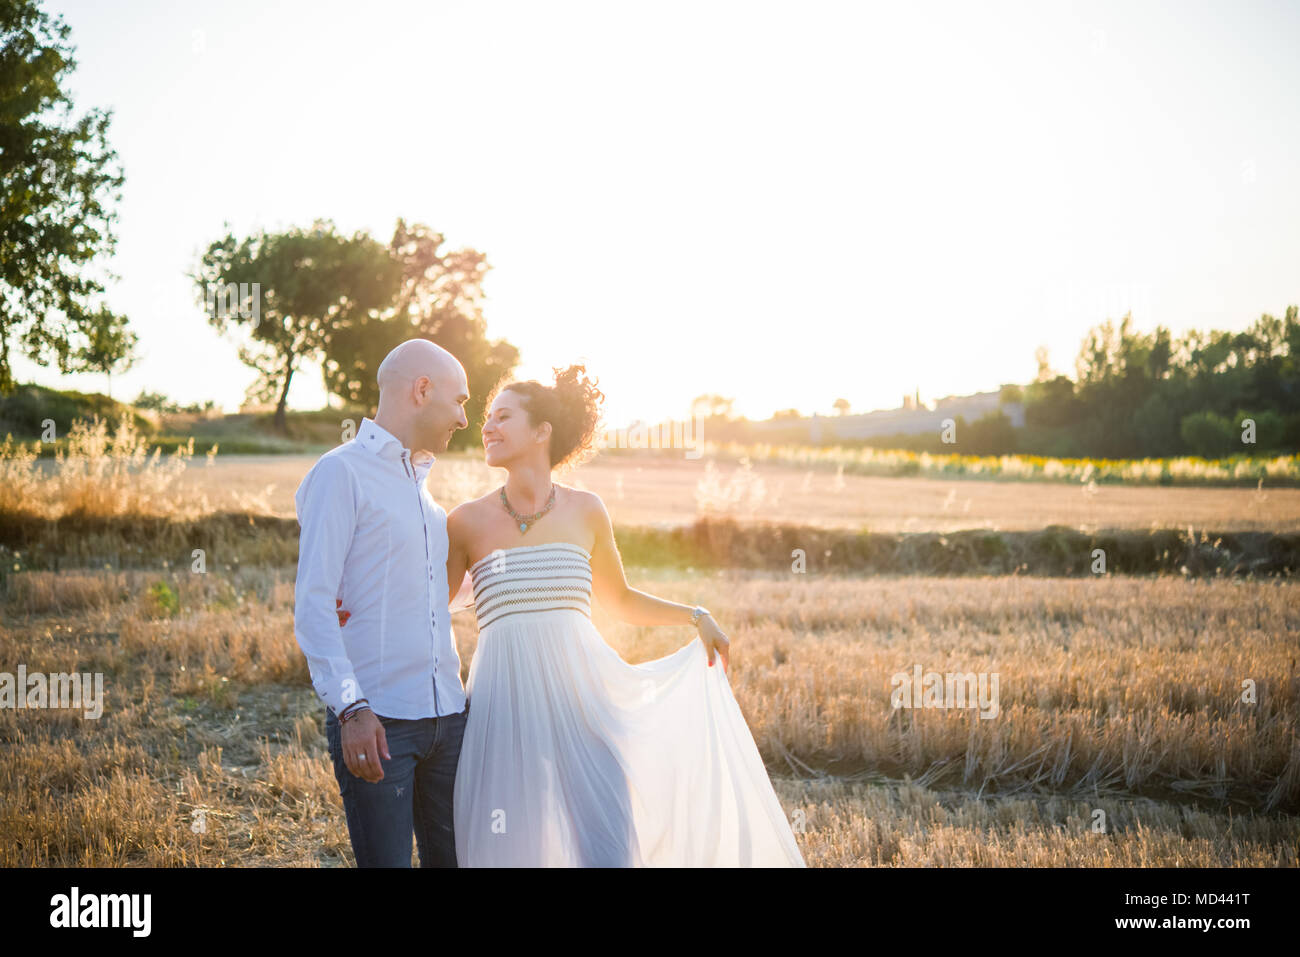 Heterosexual couple standing in field, face to face, smiling Stock Photo